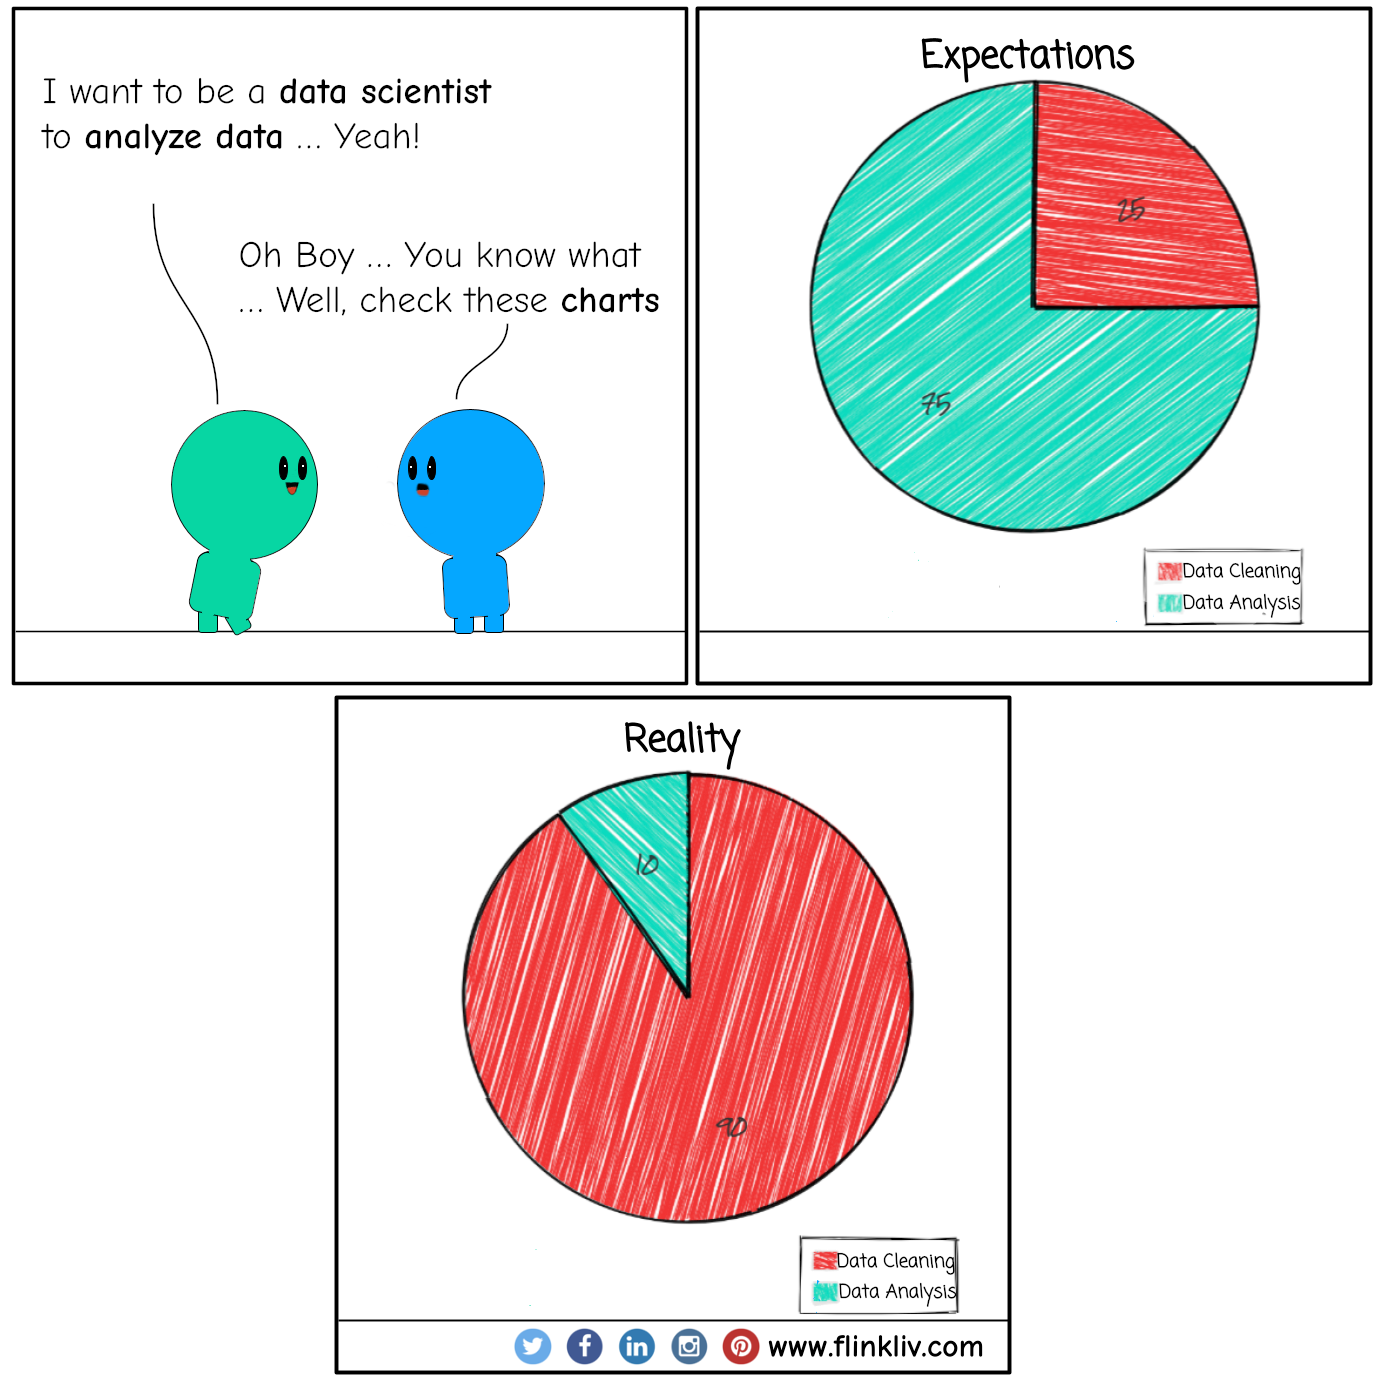 Conversation between A and B about Data Science. A: I want to be a data scientist to analyze data Yeah B: Oh Boy, you know what … Well, check these charts. Expectations 25% data cleaning and 75% data analysis. Reality 90% data cleaning and 10% data analysis. By flinkliv.com